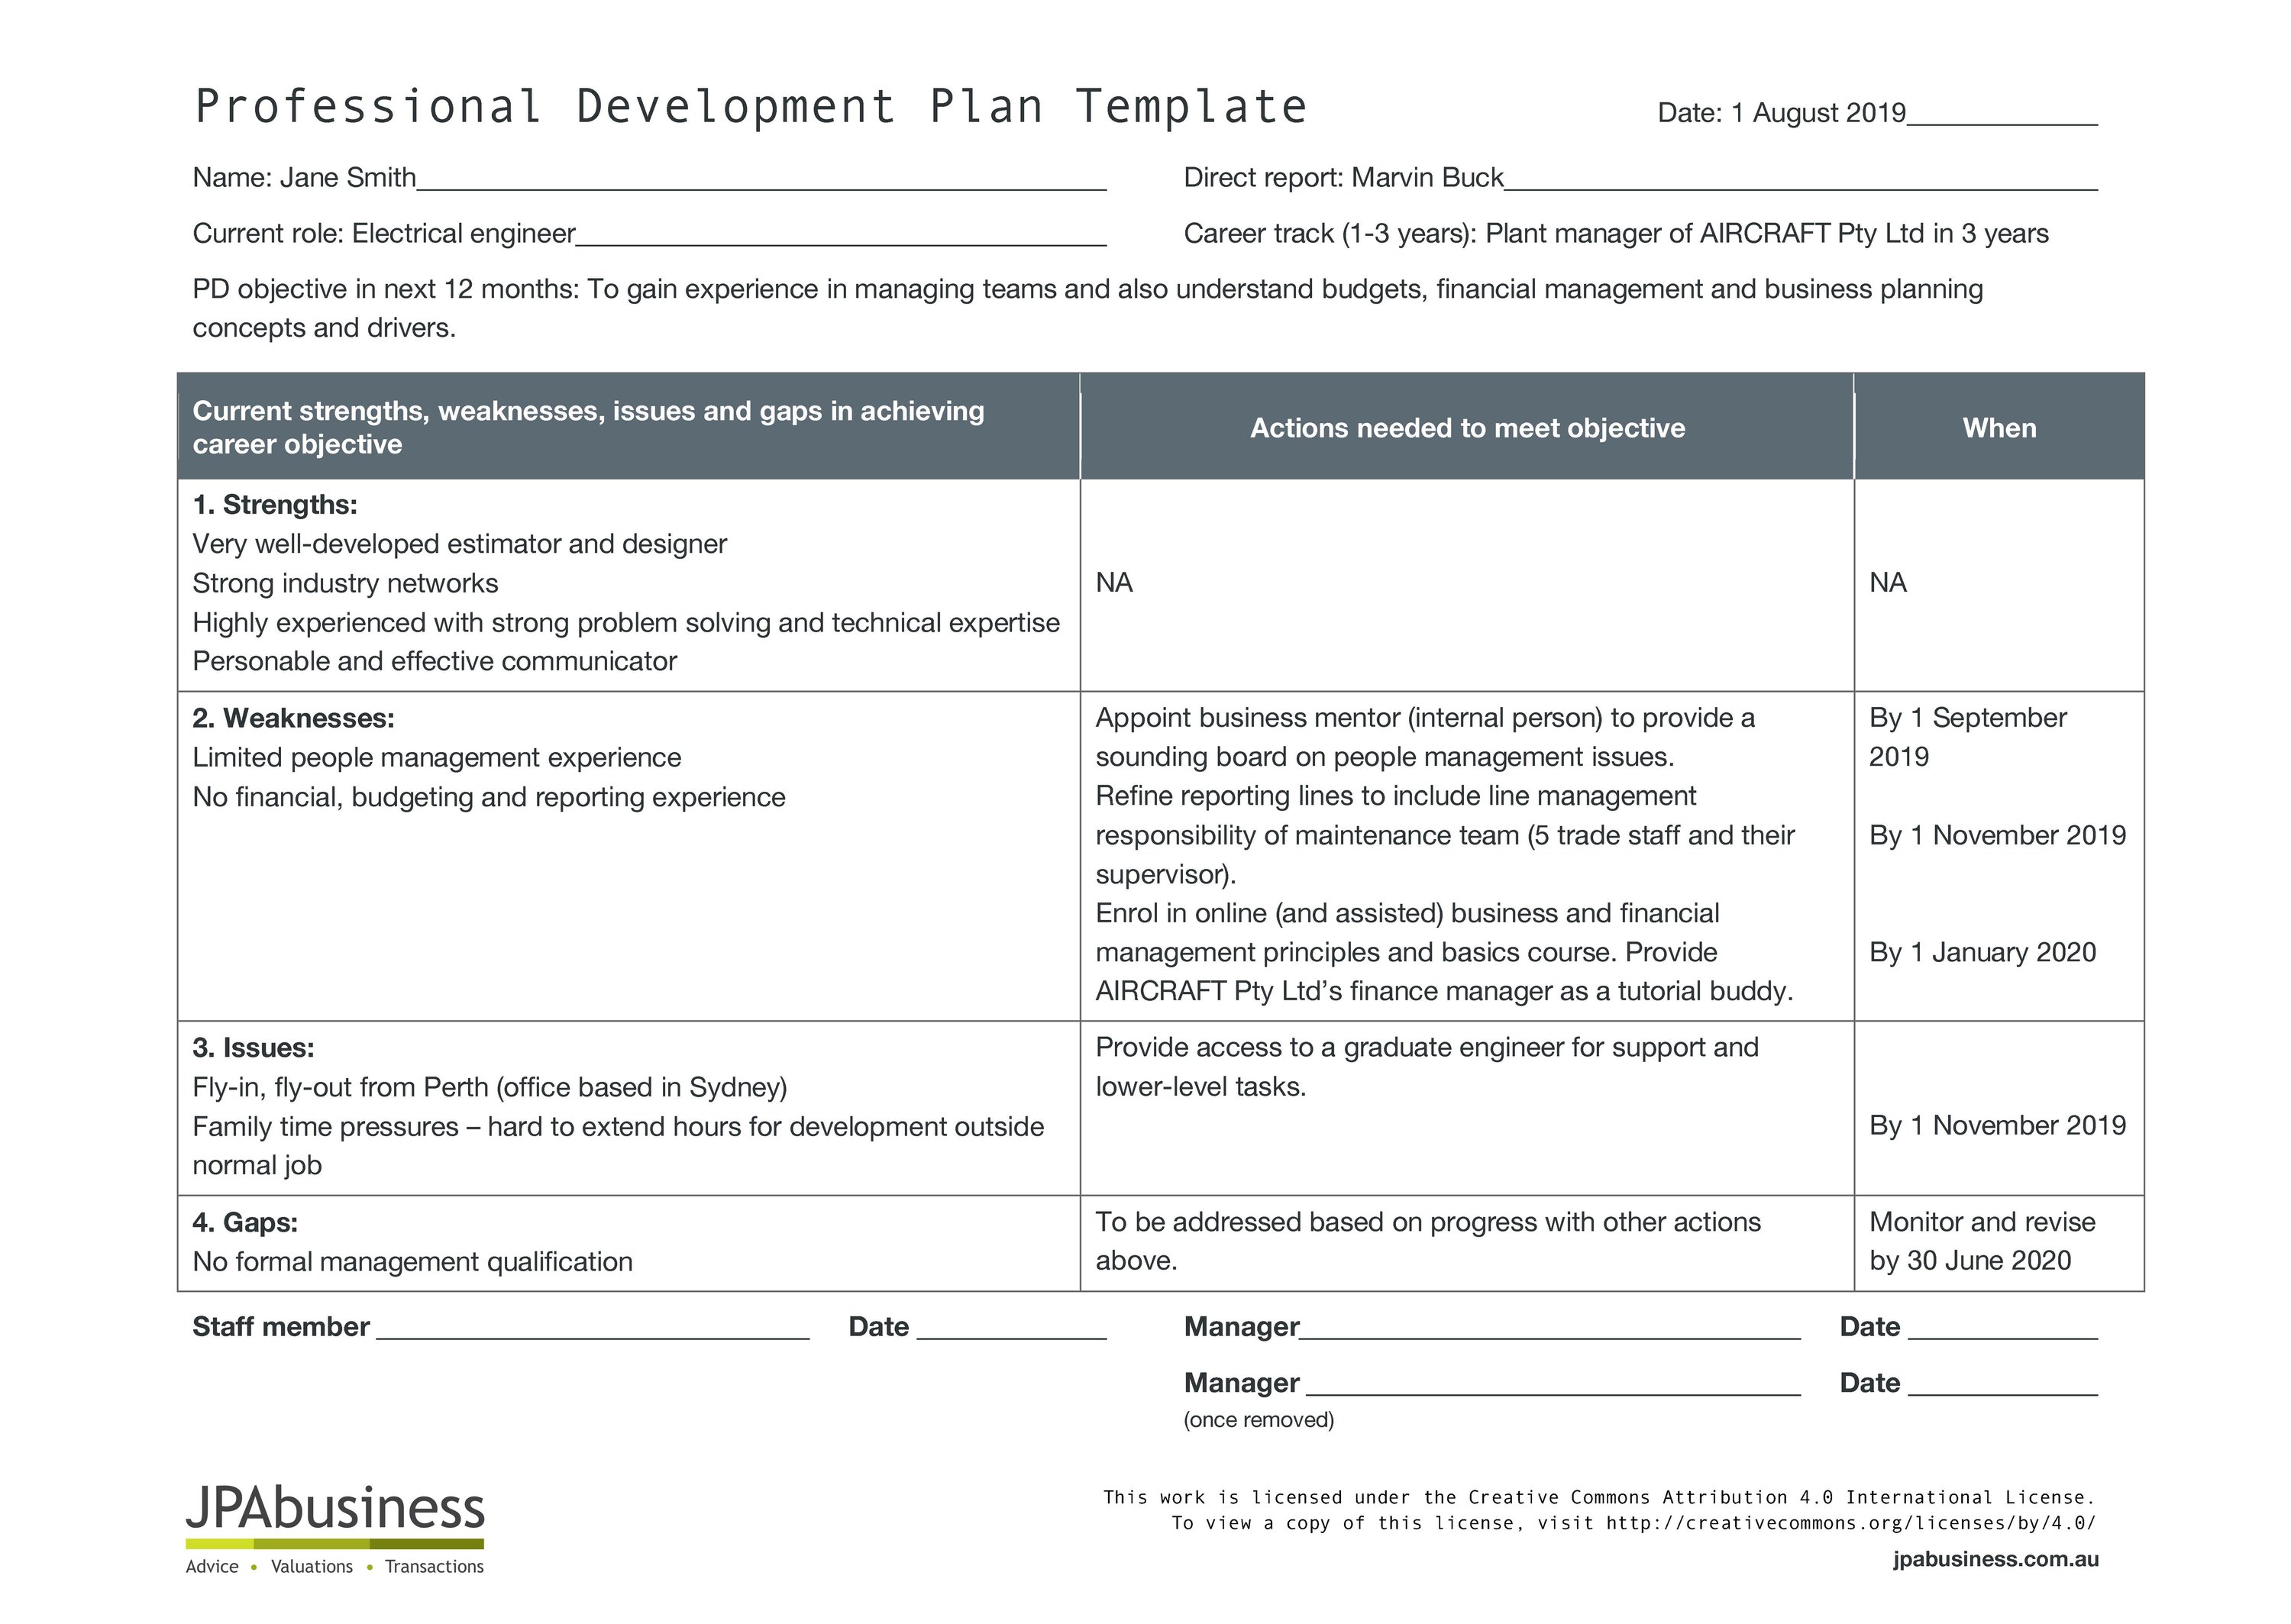 How to create a Professional Development plan [template]